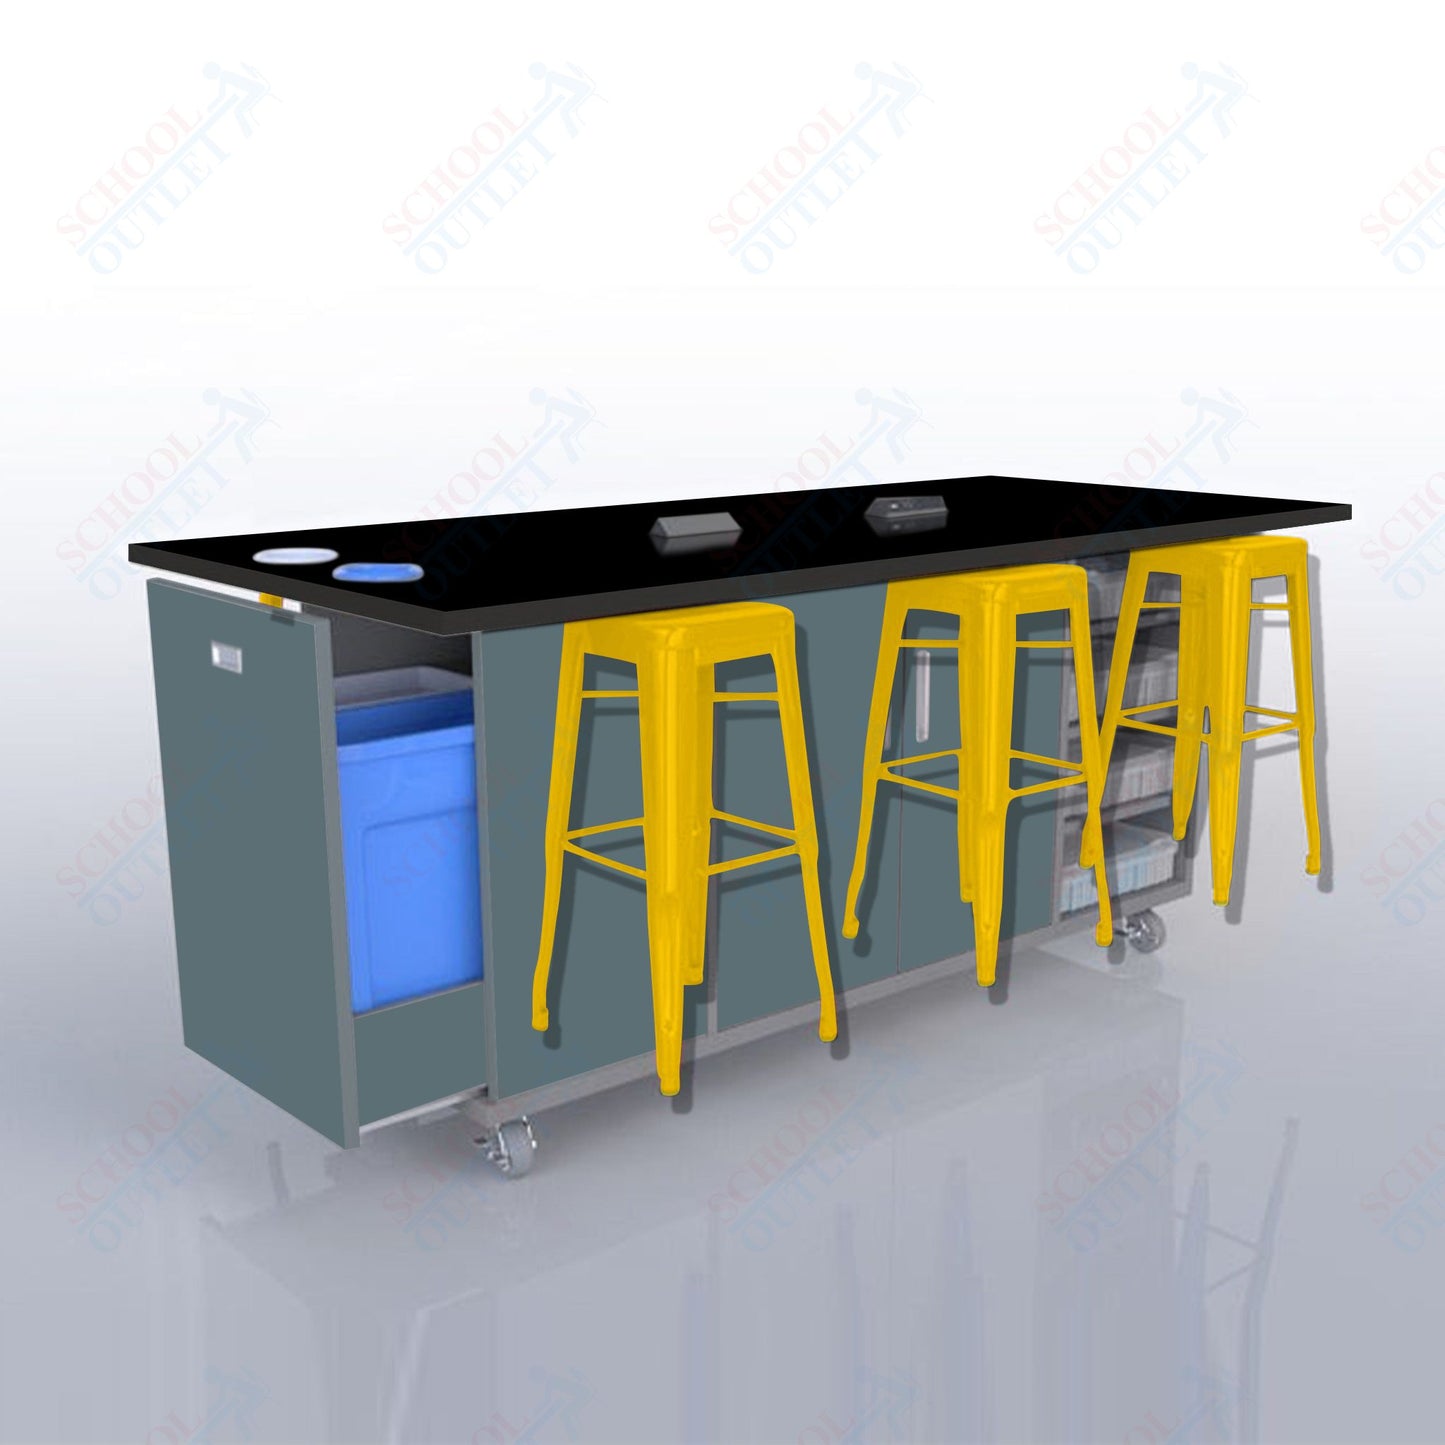 CEF ED Original Table 42"H High Pressure Laminate Top, Laminate Base with  6 Stools, Storage Bins, Trash Bins, and Electrical Outlets Included.